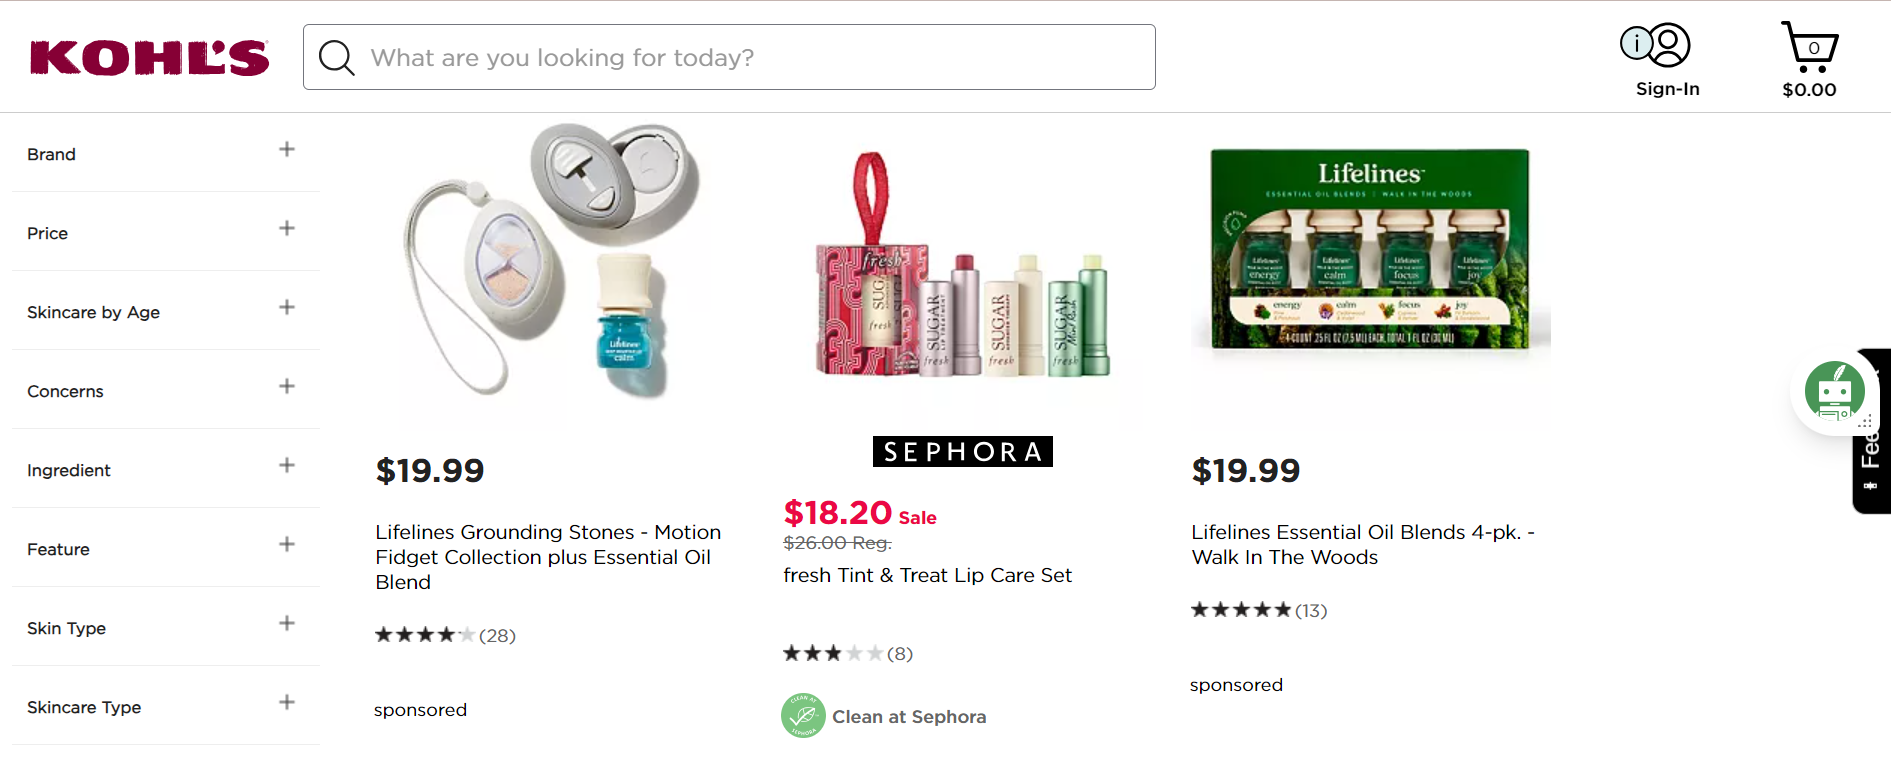 Kohl's: A Retail Powerhouse for Your Beauty Dropshipping Needs